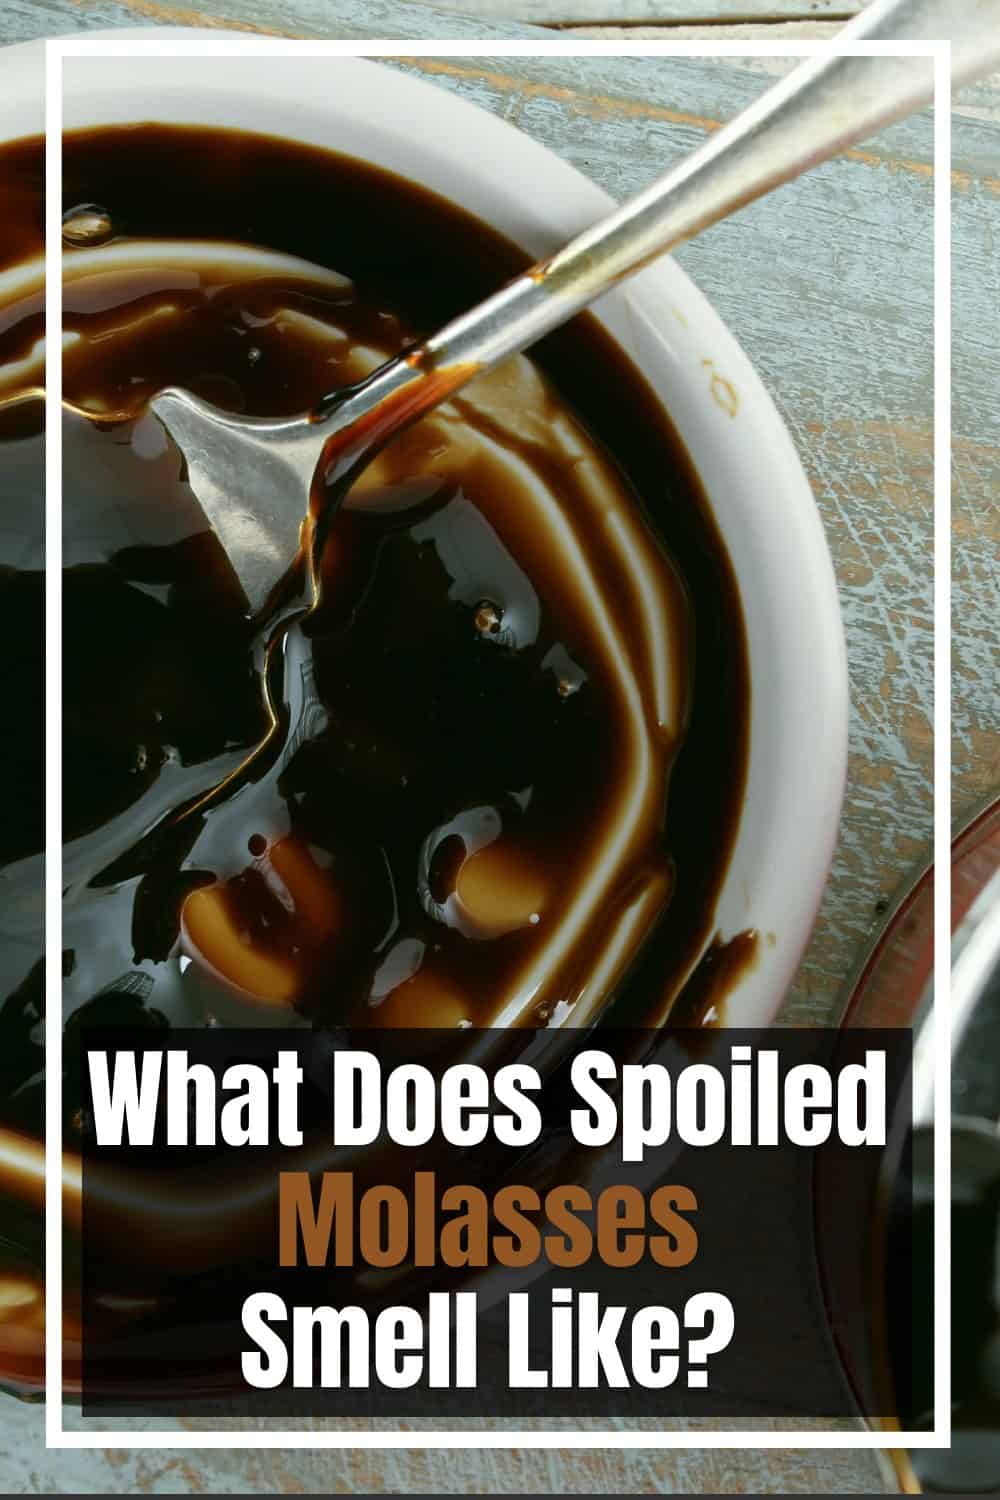 Spoiled molasses has a sour yeasty smell